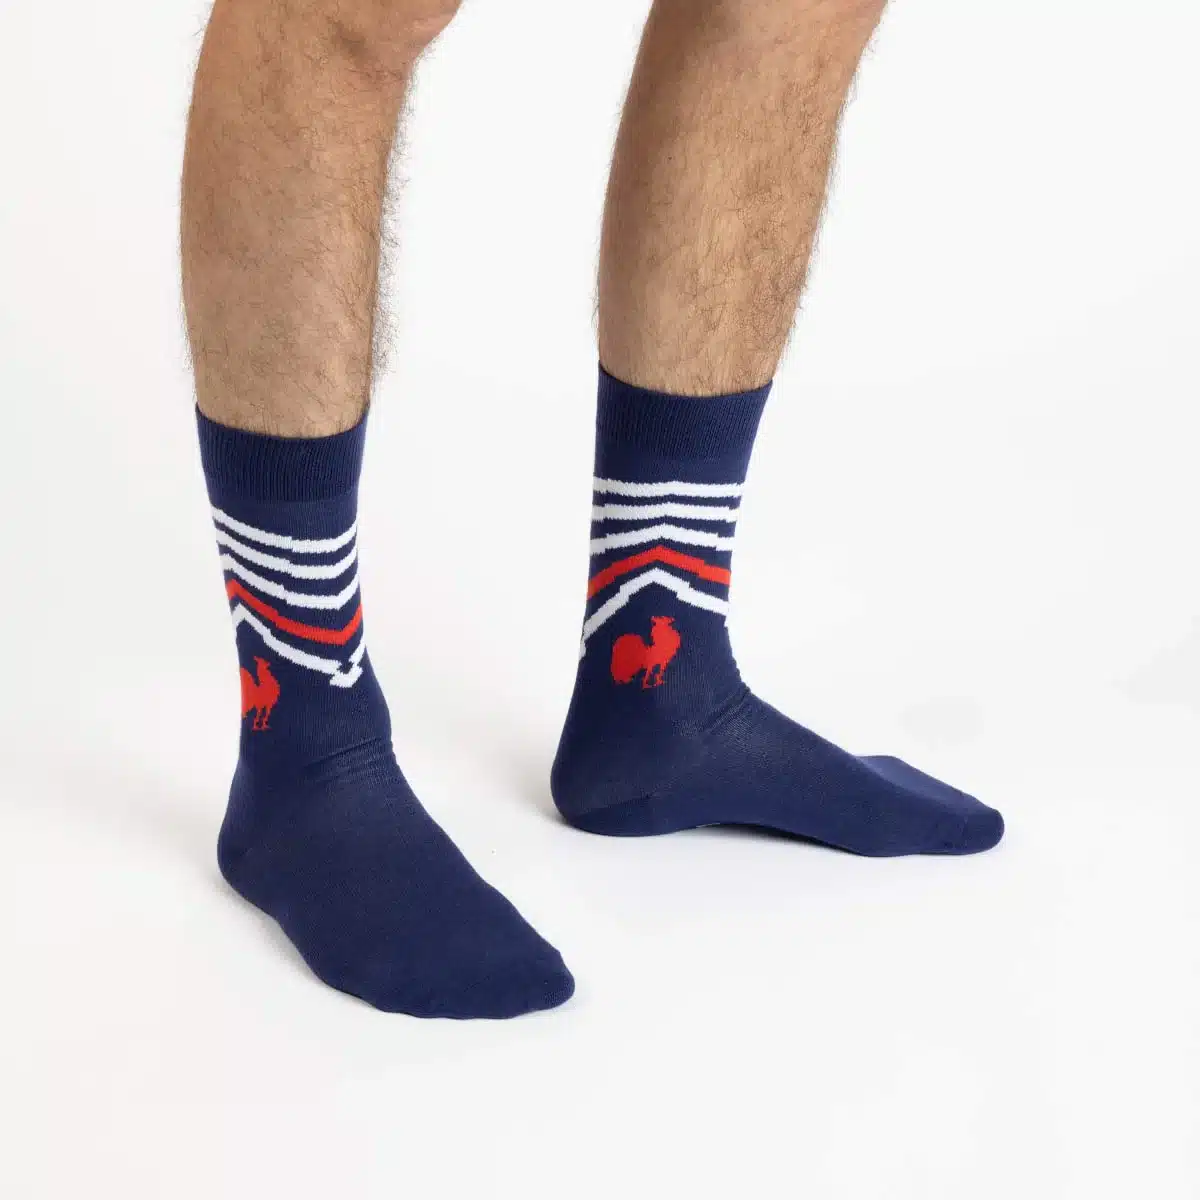 Chaussettes-FFR-france-rugby-homme-label-chaussette_1200x